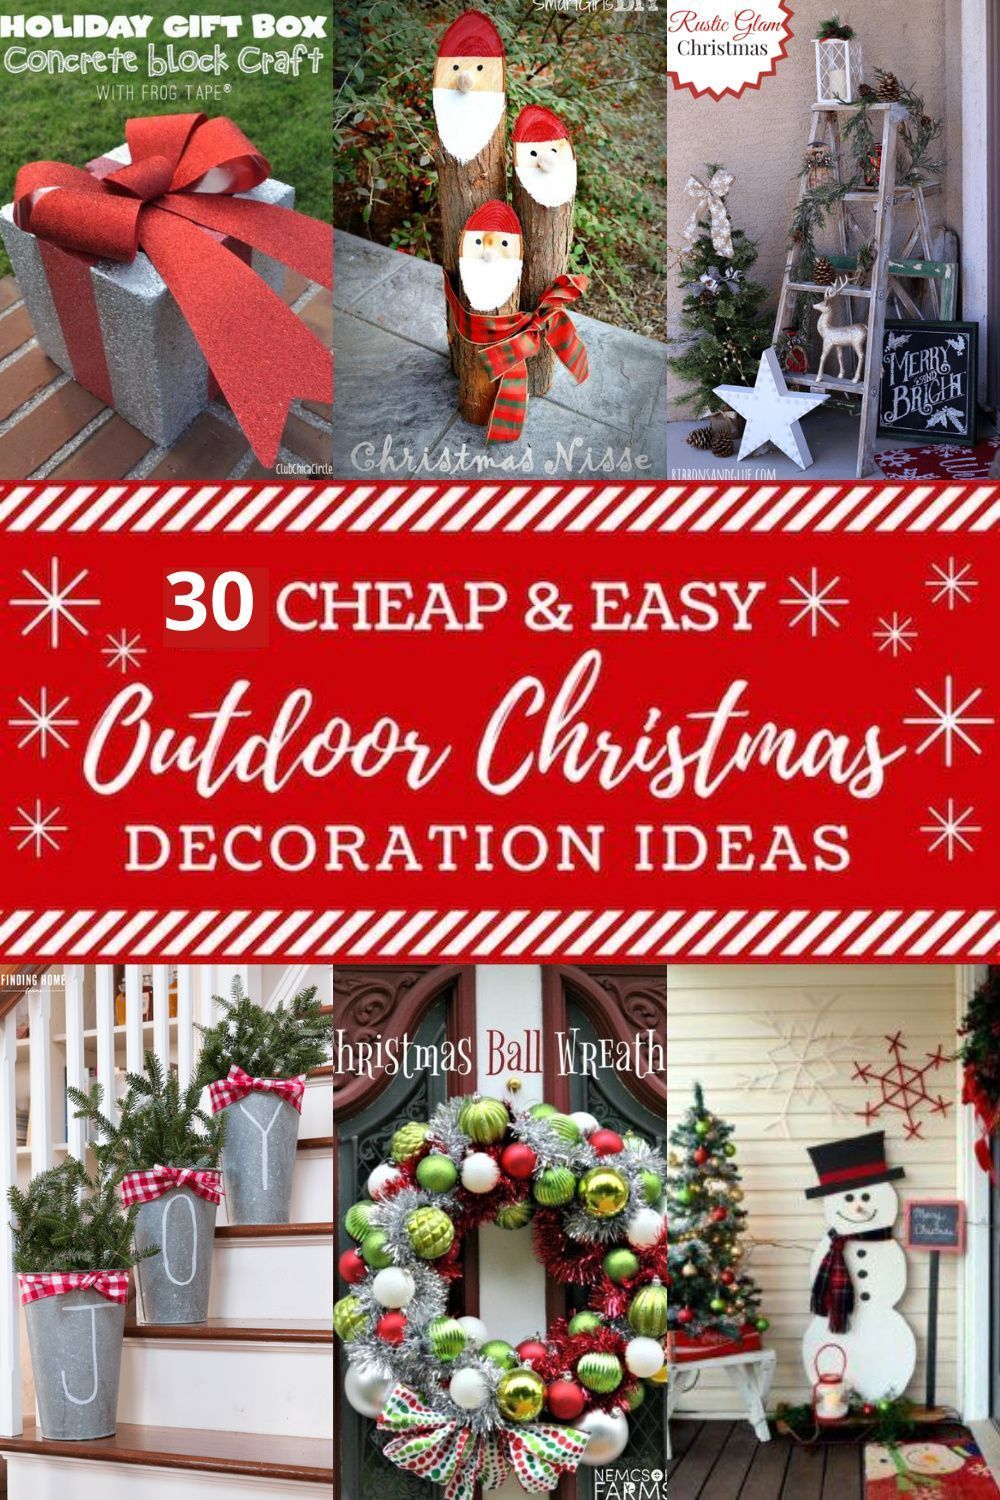 30 Cheap And Easy Outdoor Christmas Decoration Ideas -   18 diy christmas decorations easy budget ideas